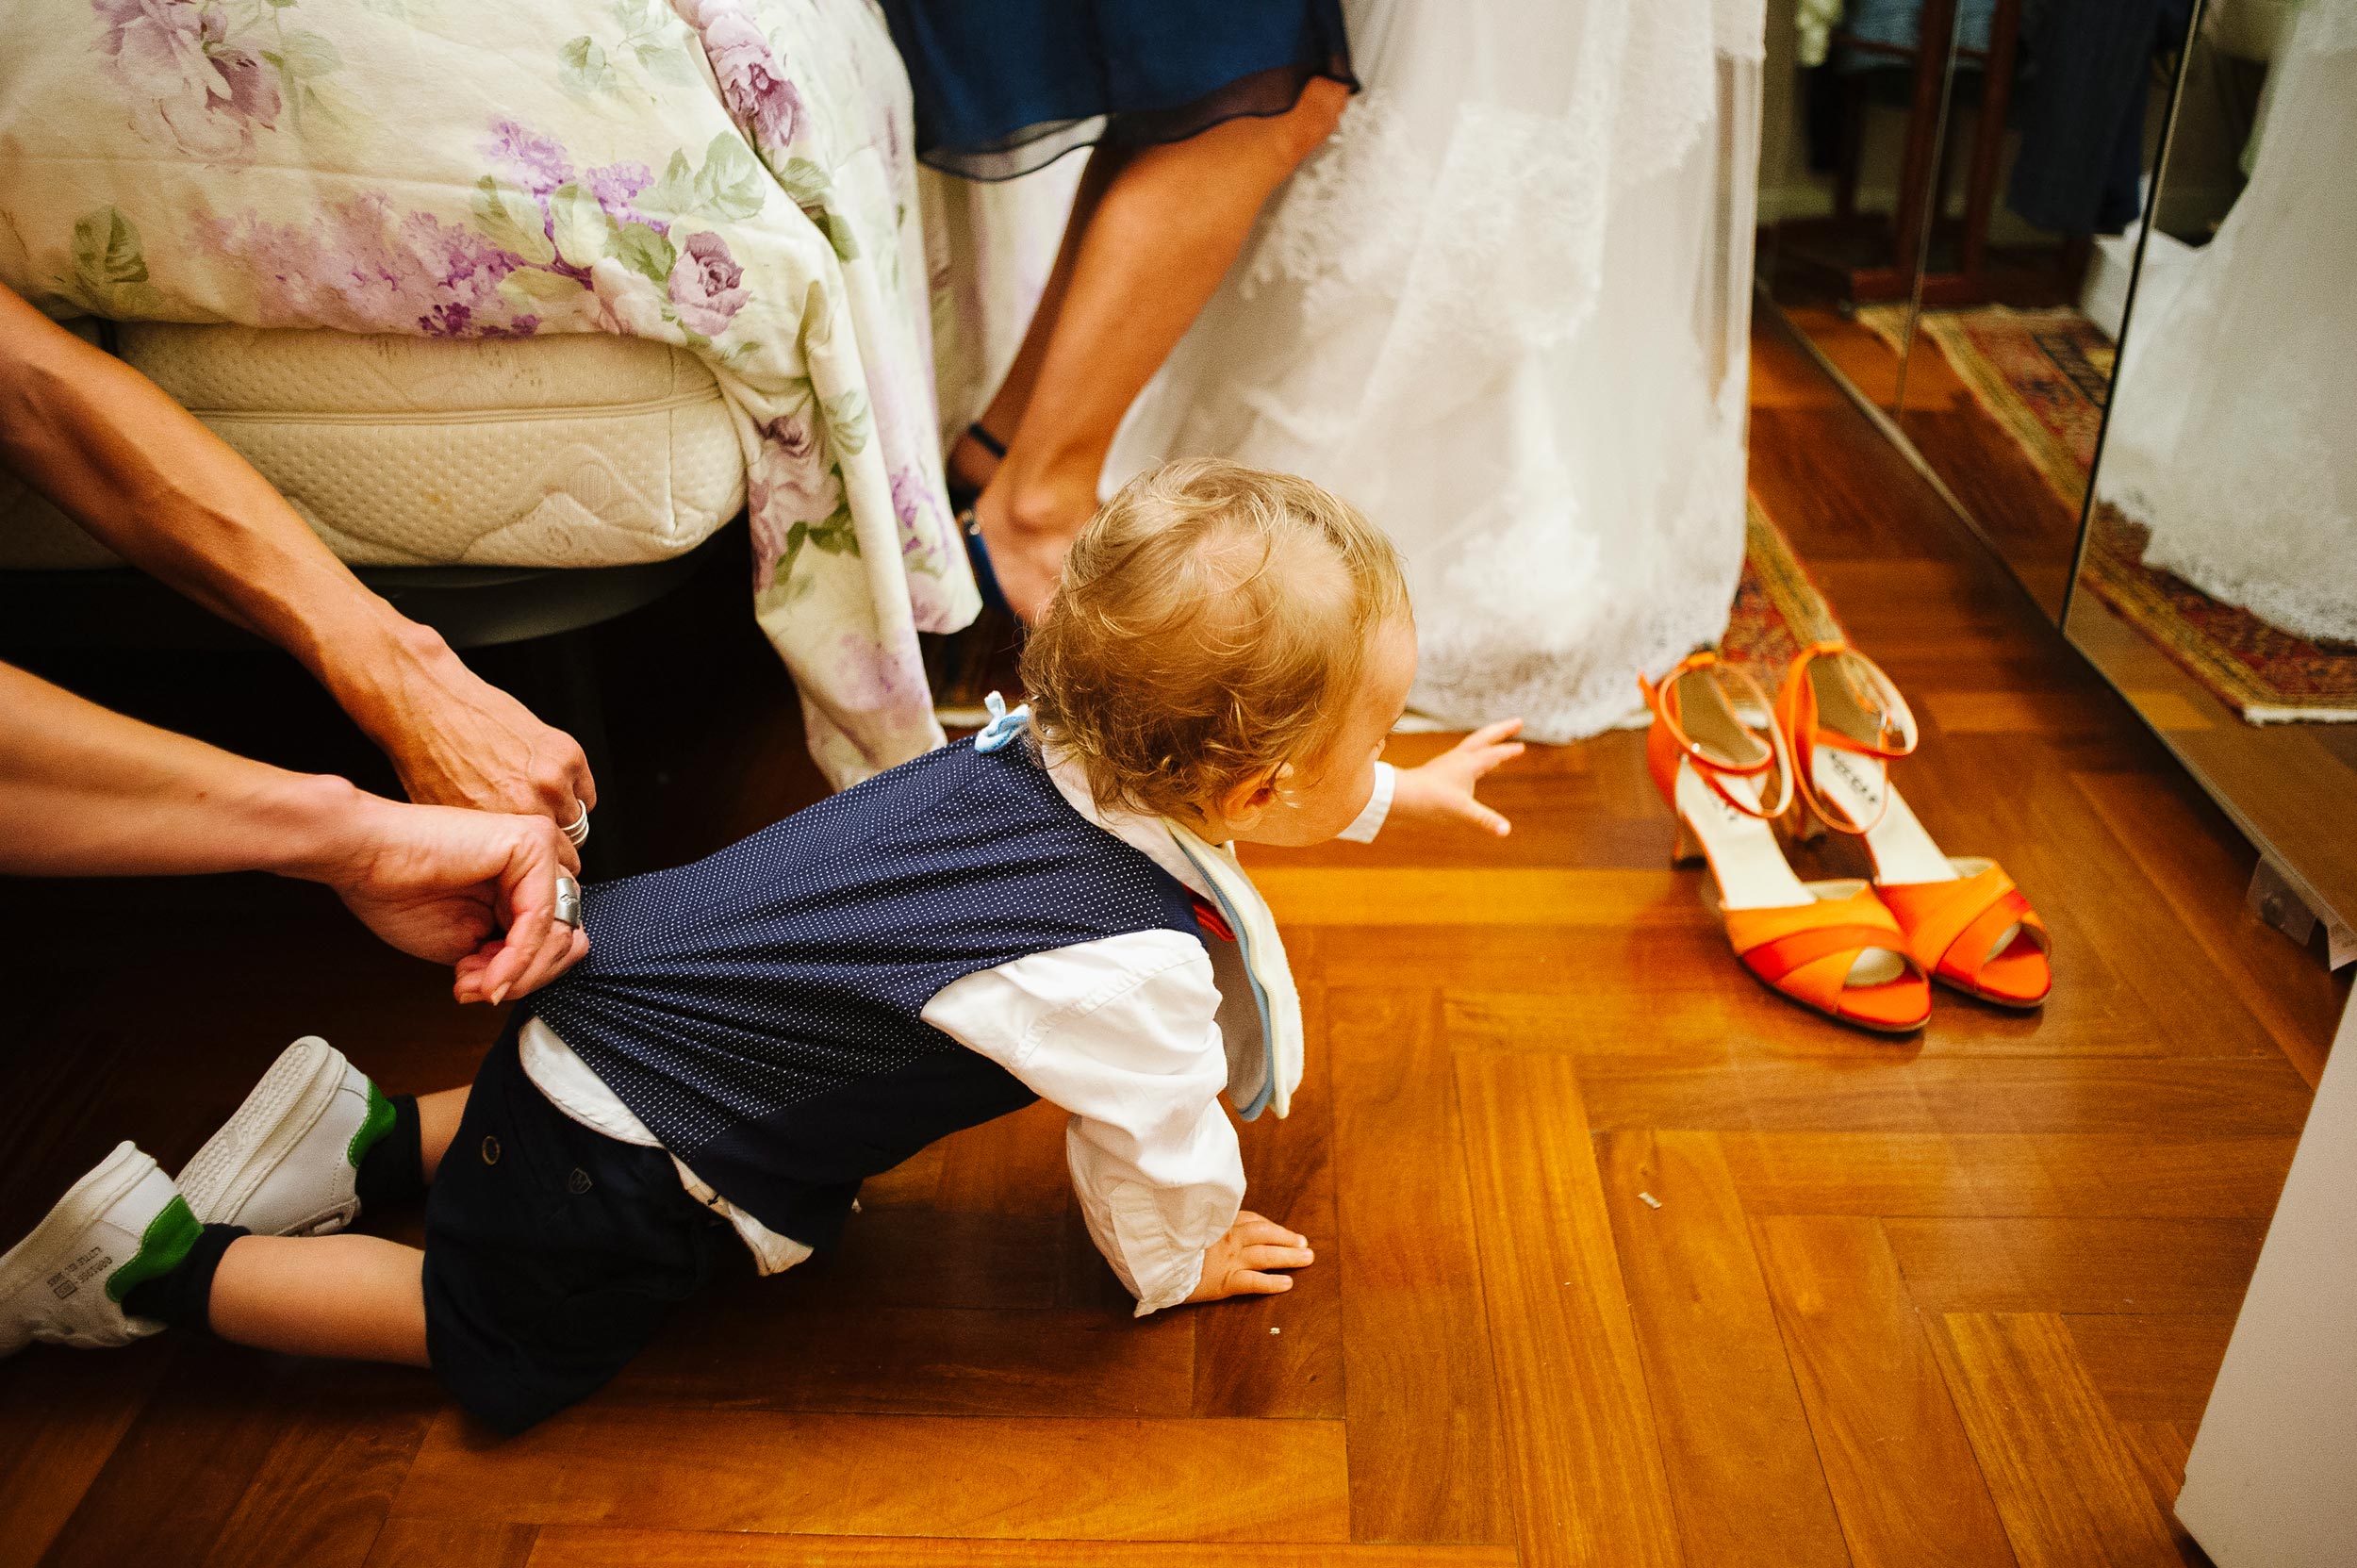 kid-aims-for-brides-shoes-while-his-mom-holds-him.jpg